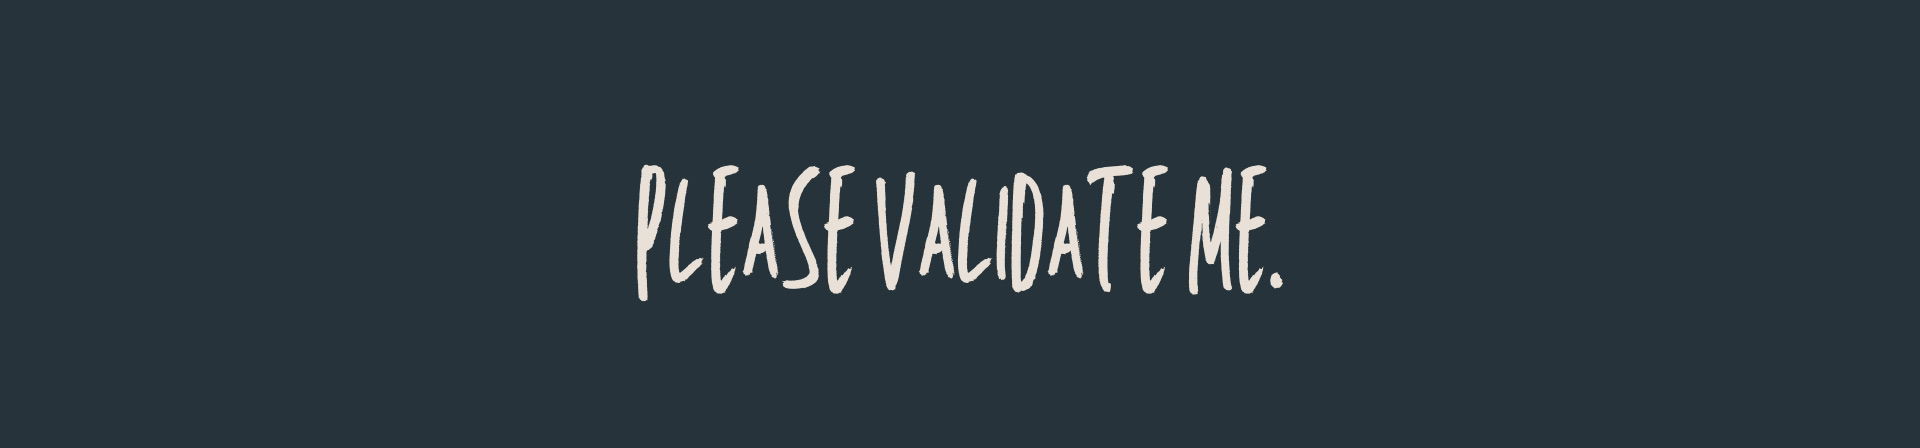 beige text on navy blue background, text reads: "please validate me." 